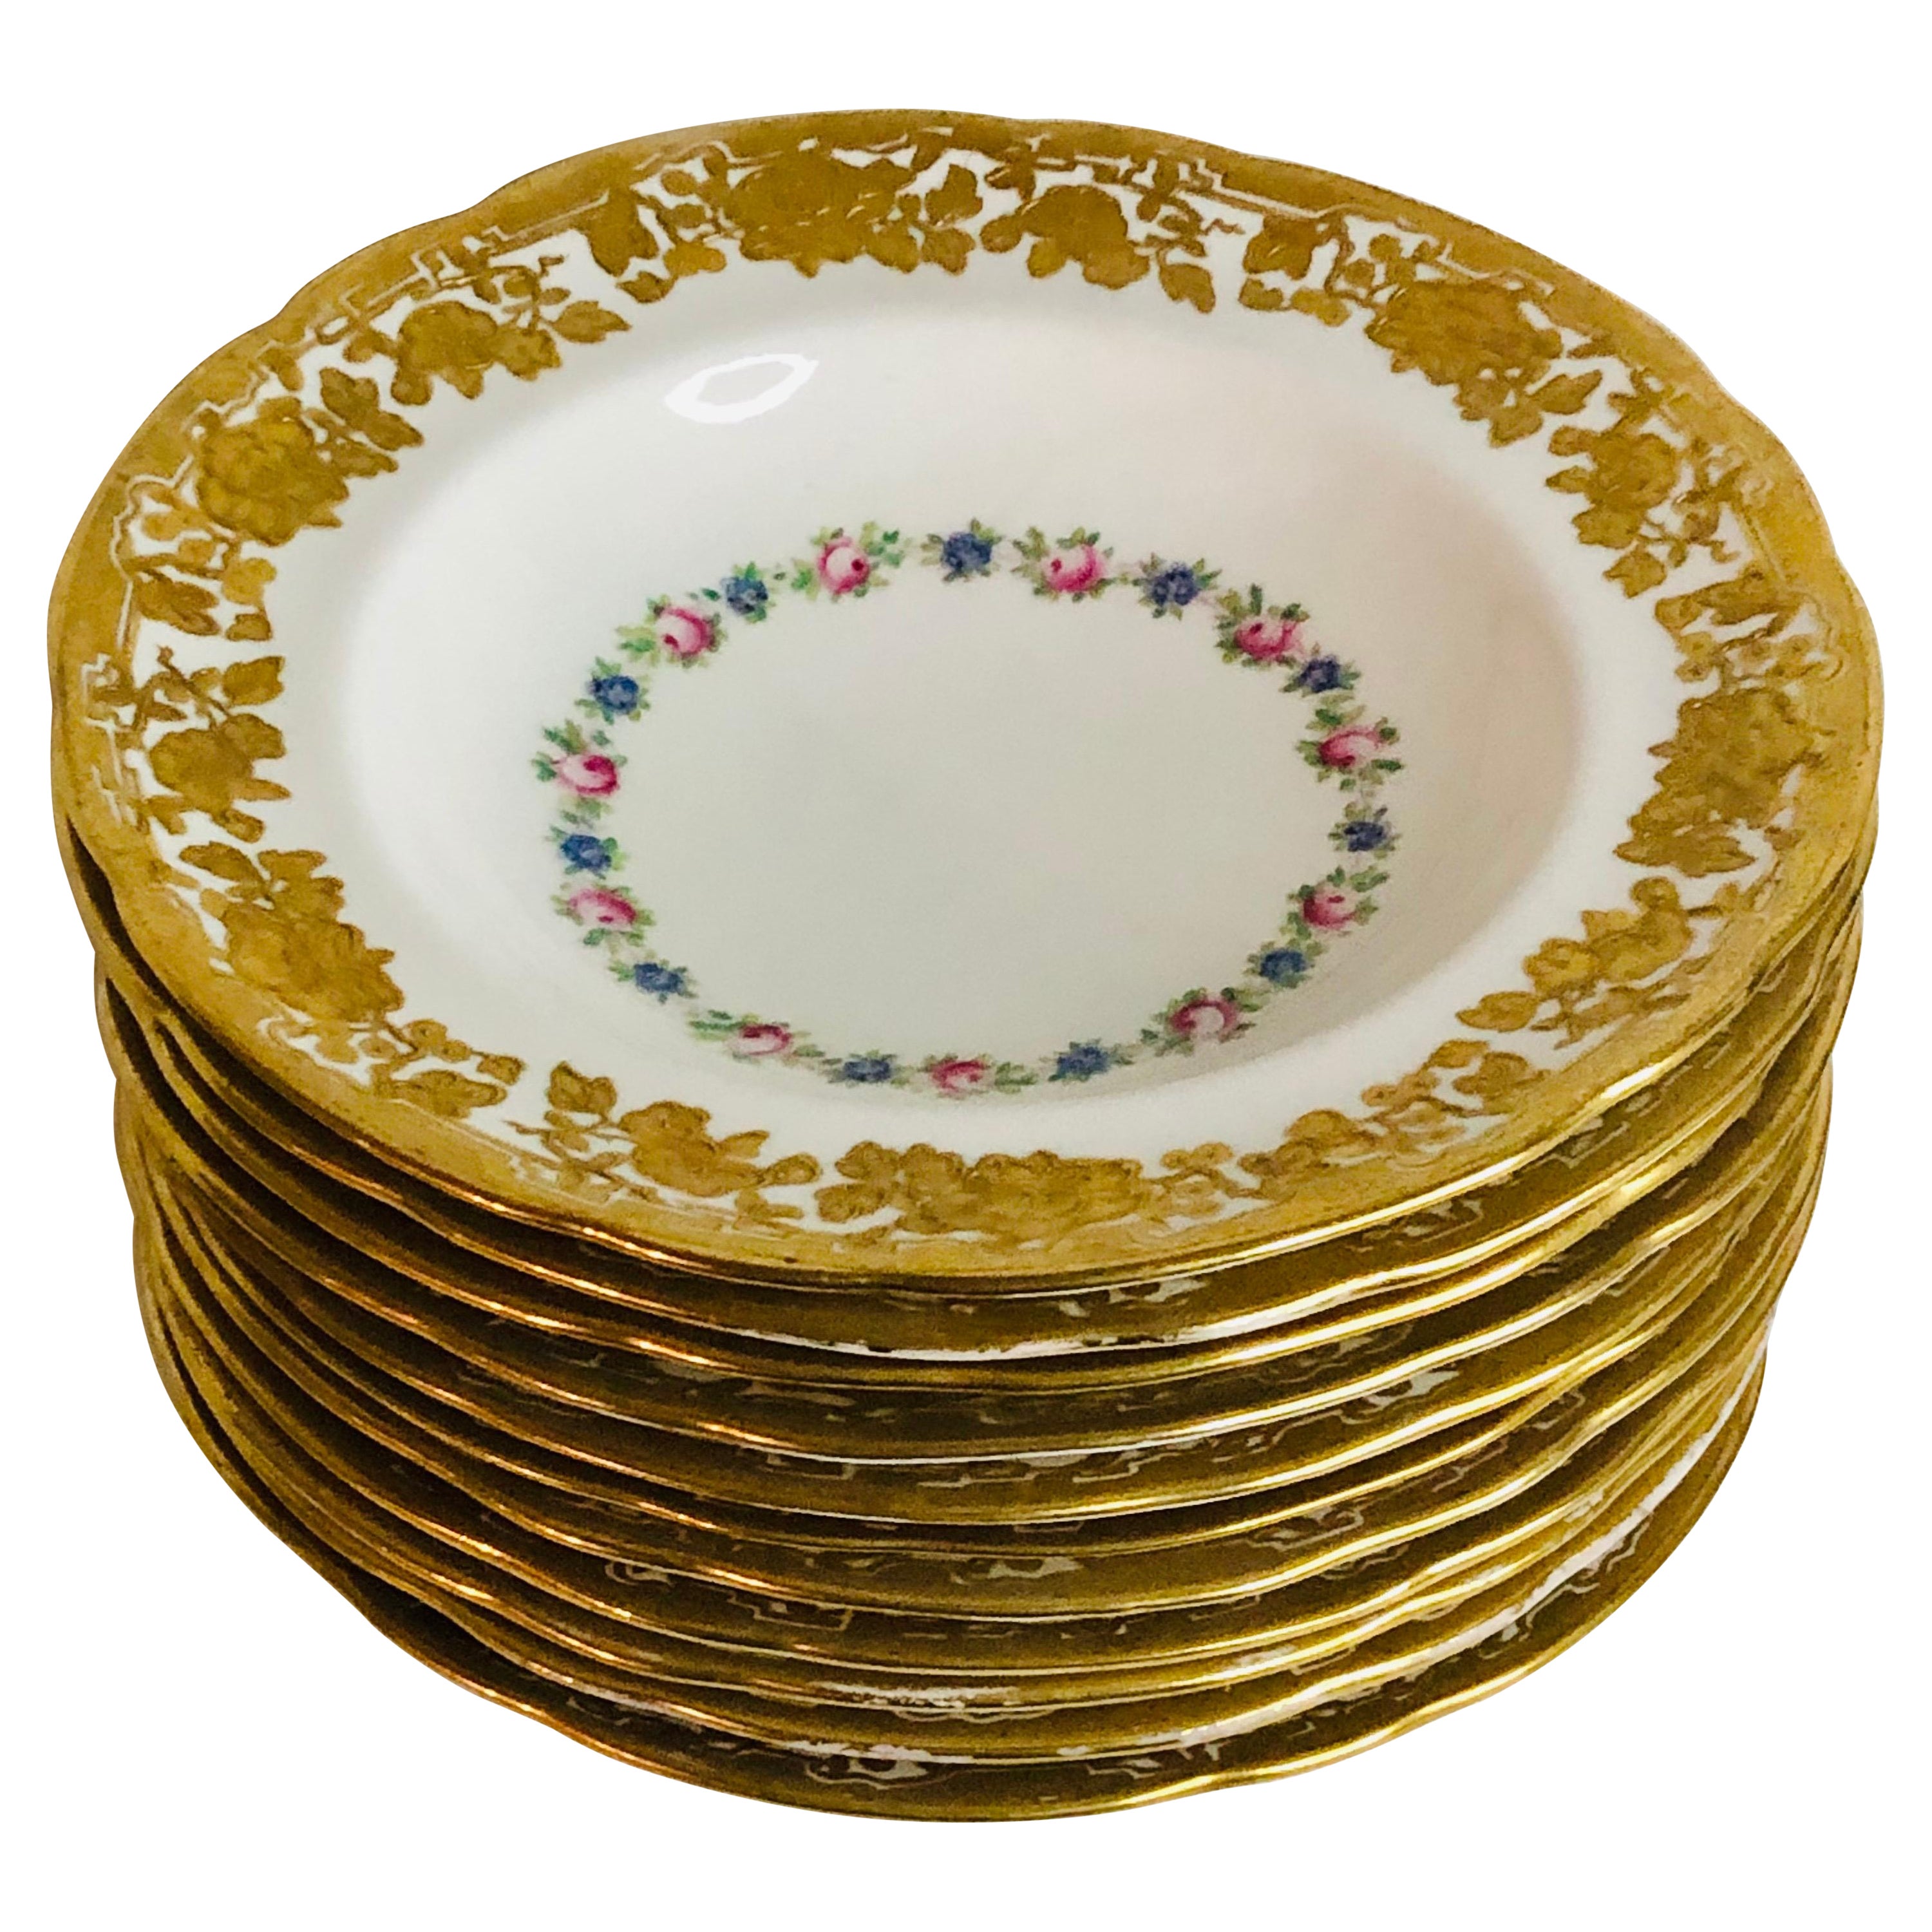 Set of Eleven Hammersley & Co. Wide Rim Soups with Raised Gilded Flowers on Rim